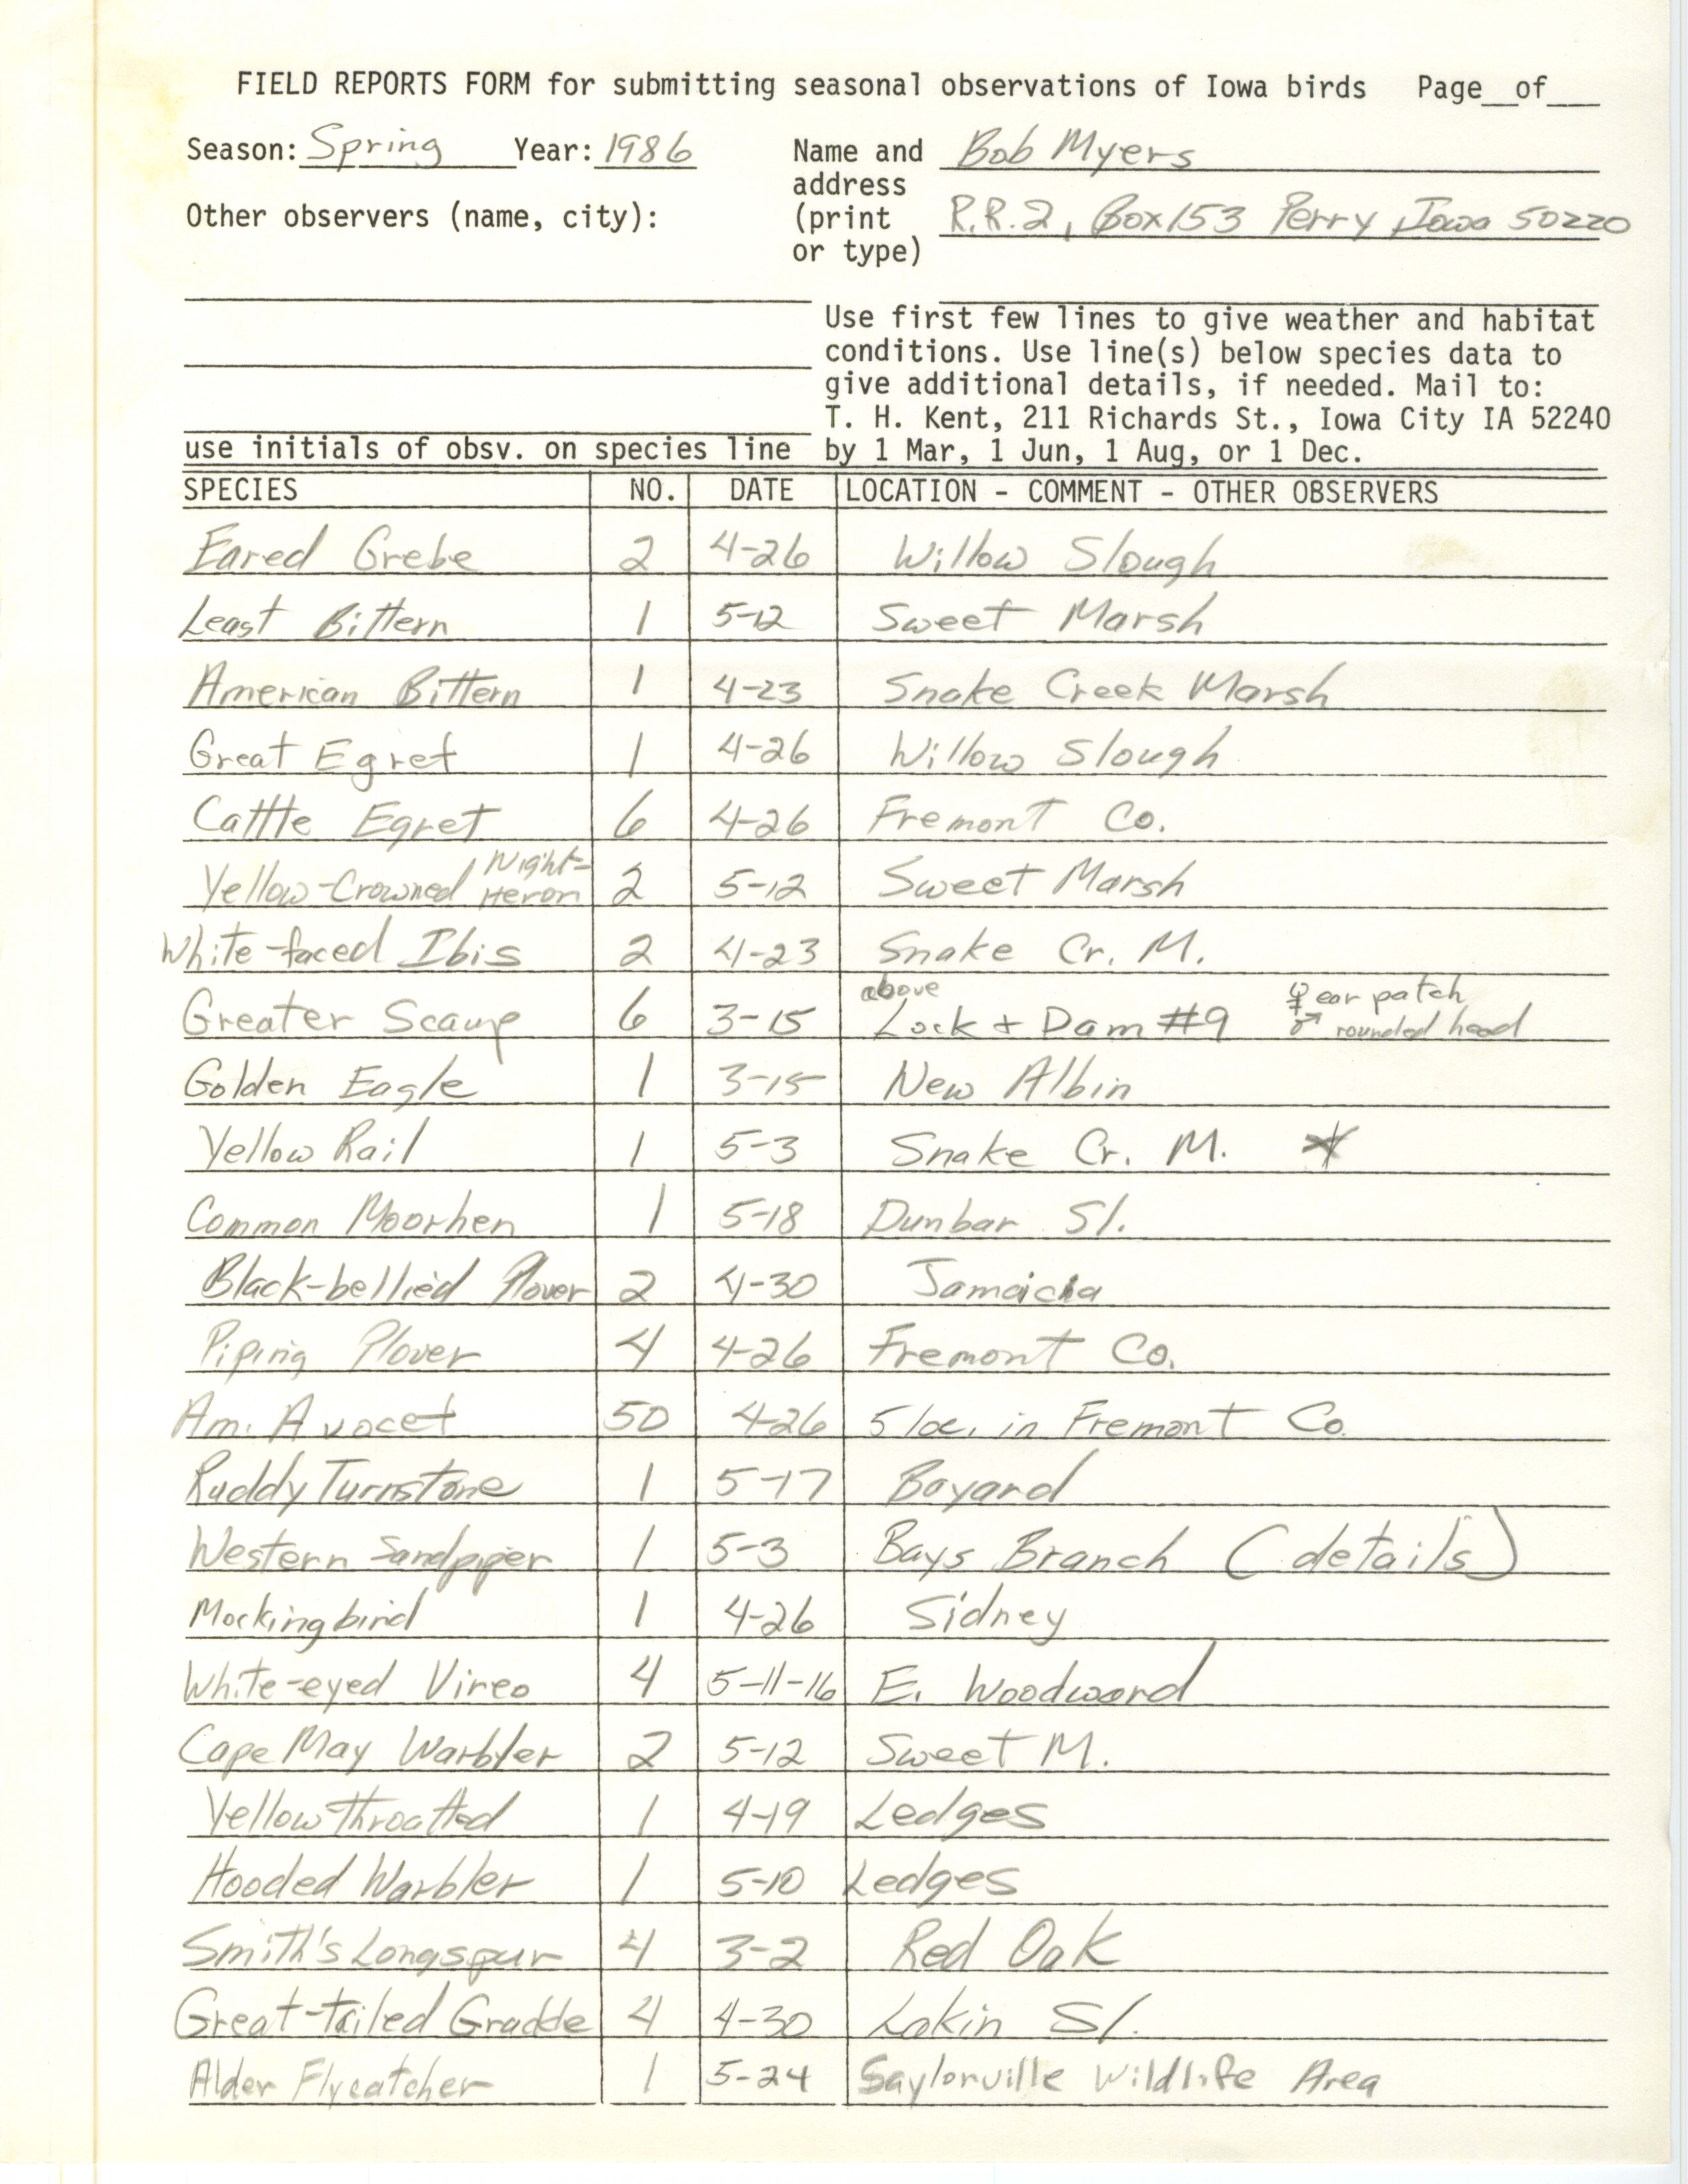 Field reports form for submitting seasonal observations of Iowa birds, Bob Myers, Spring 1986